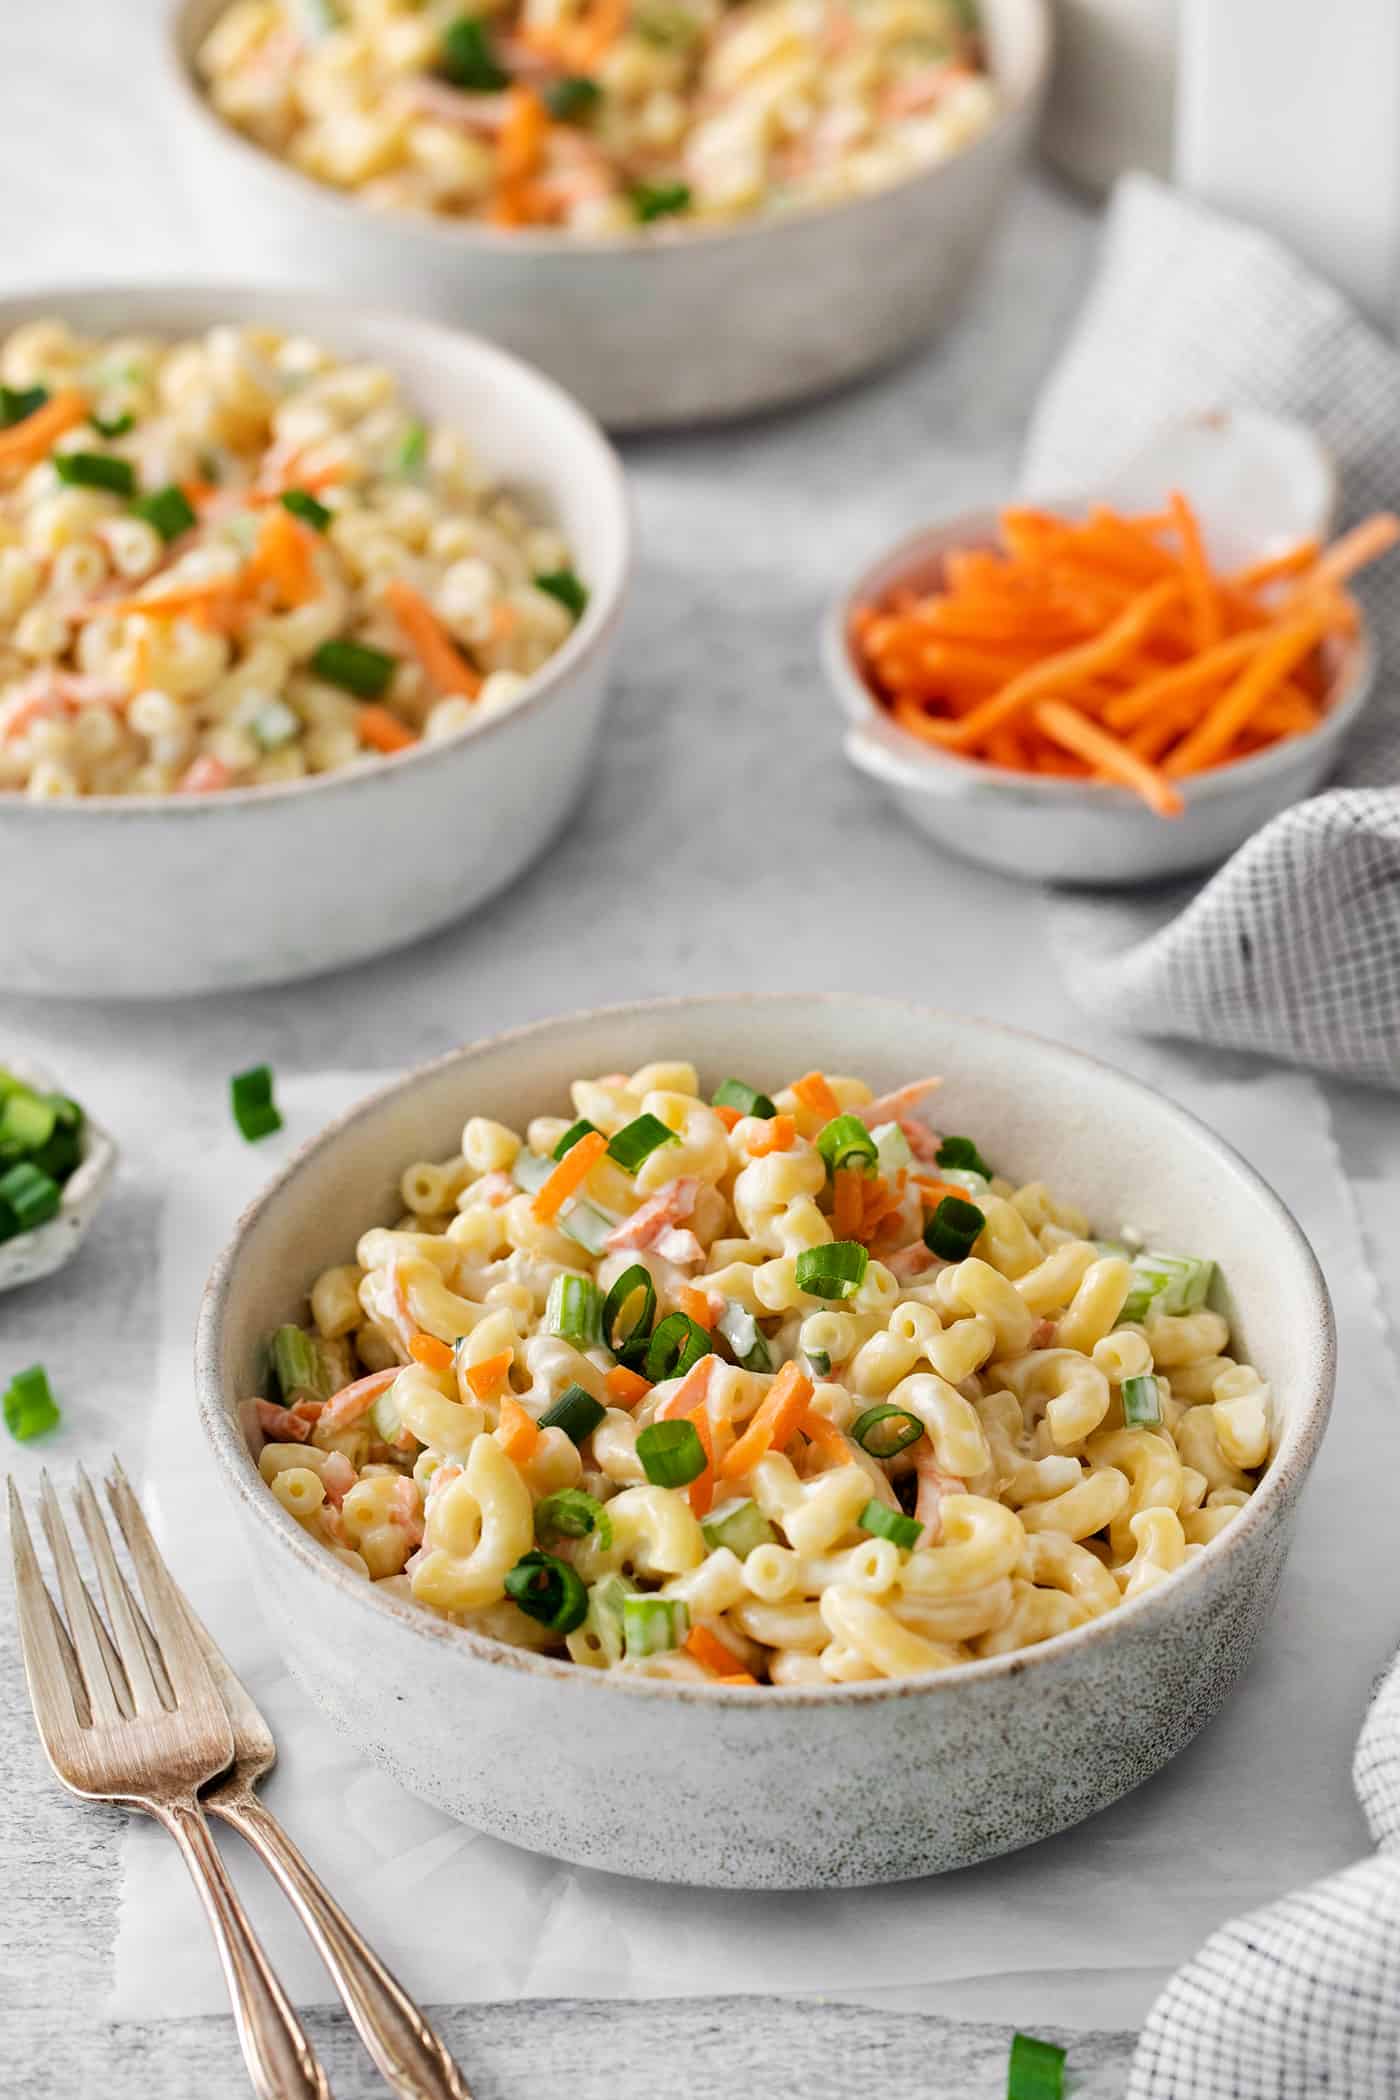 Bowls of hawaiian macaroni salad are seen on a table with shredded carrots in the background.